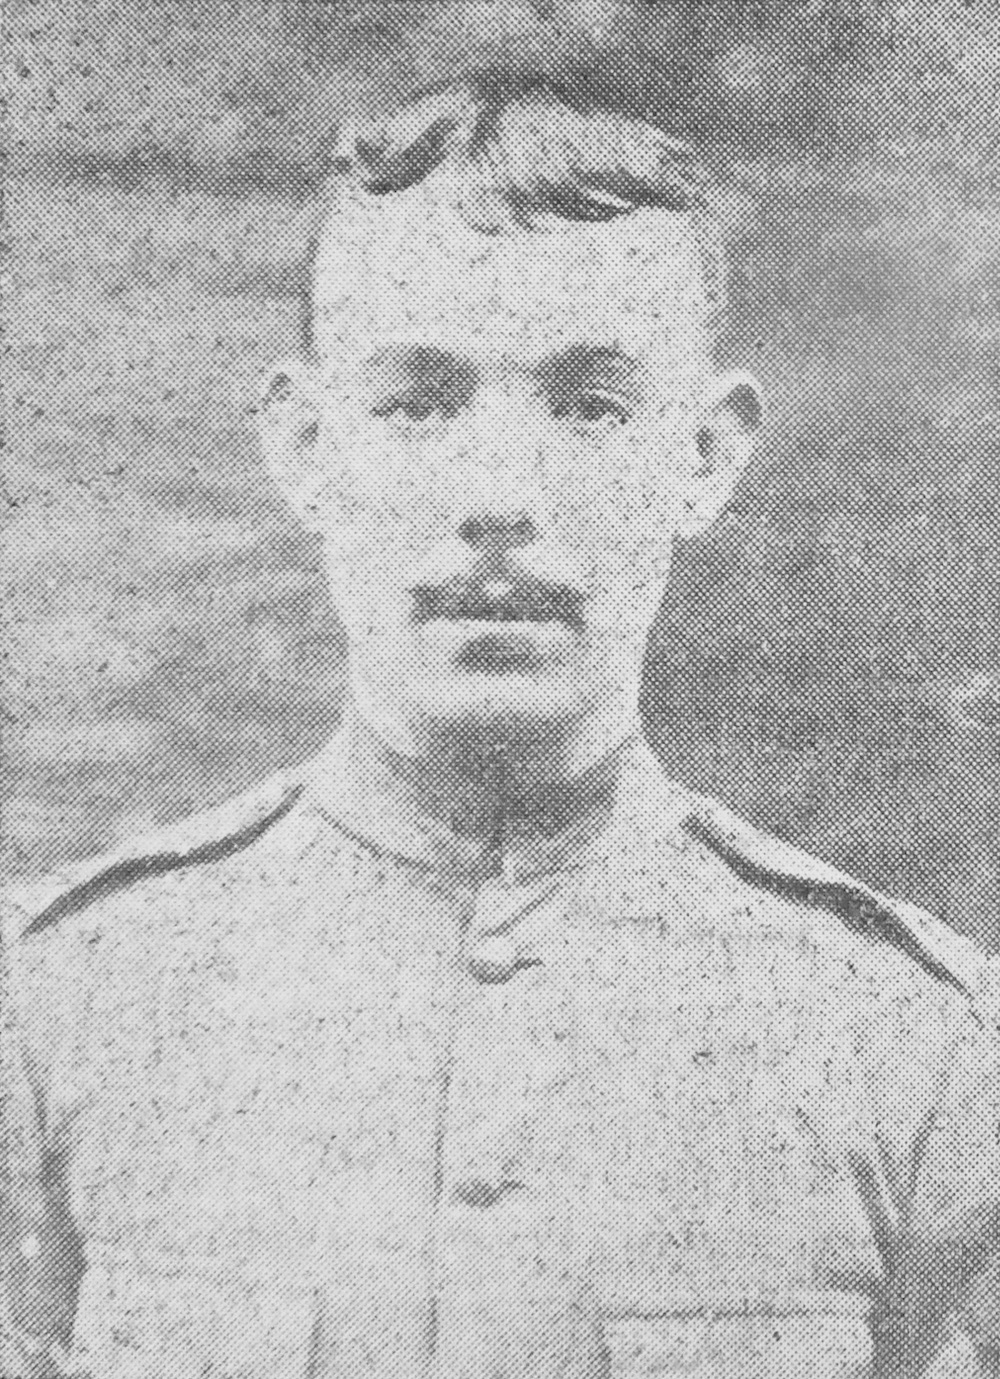 Andrew Russell, Cameron Highlanders.